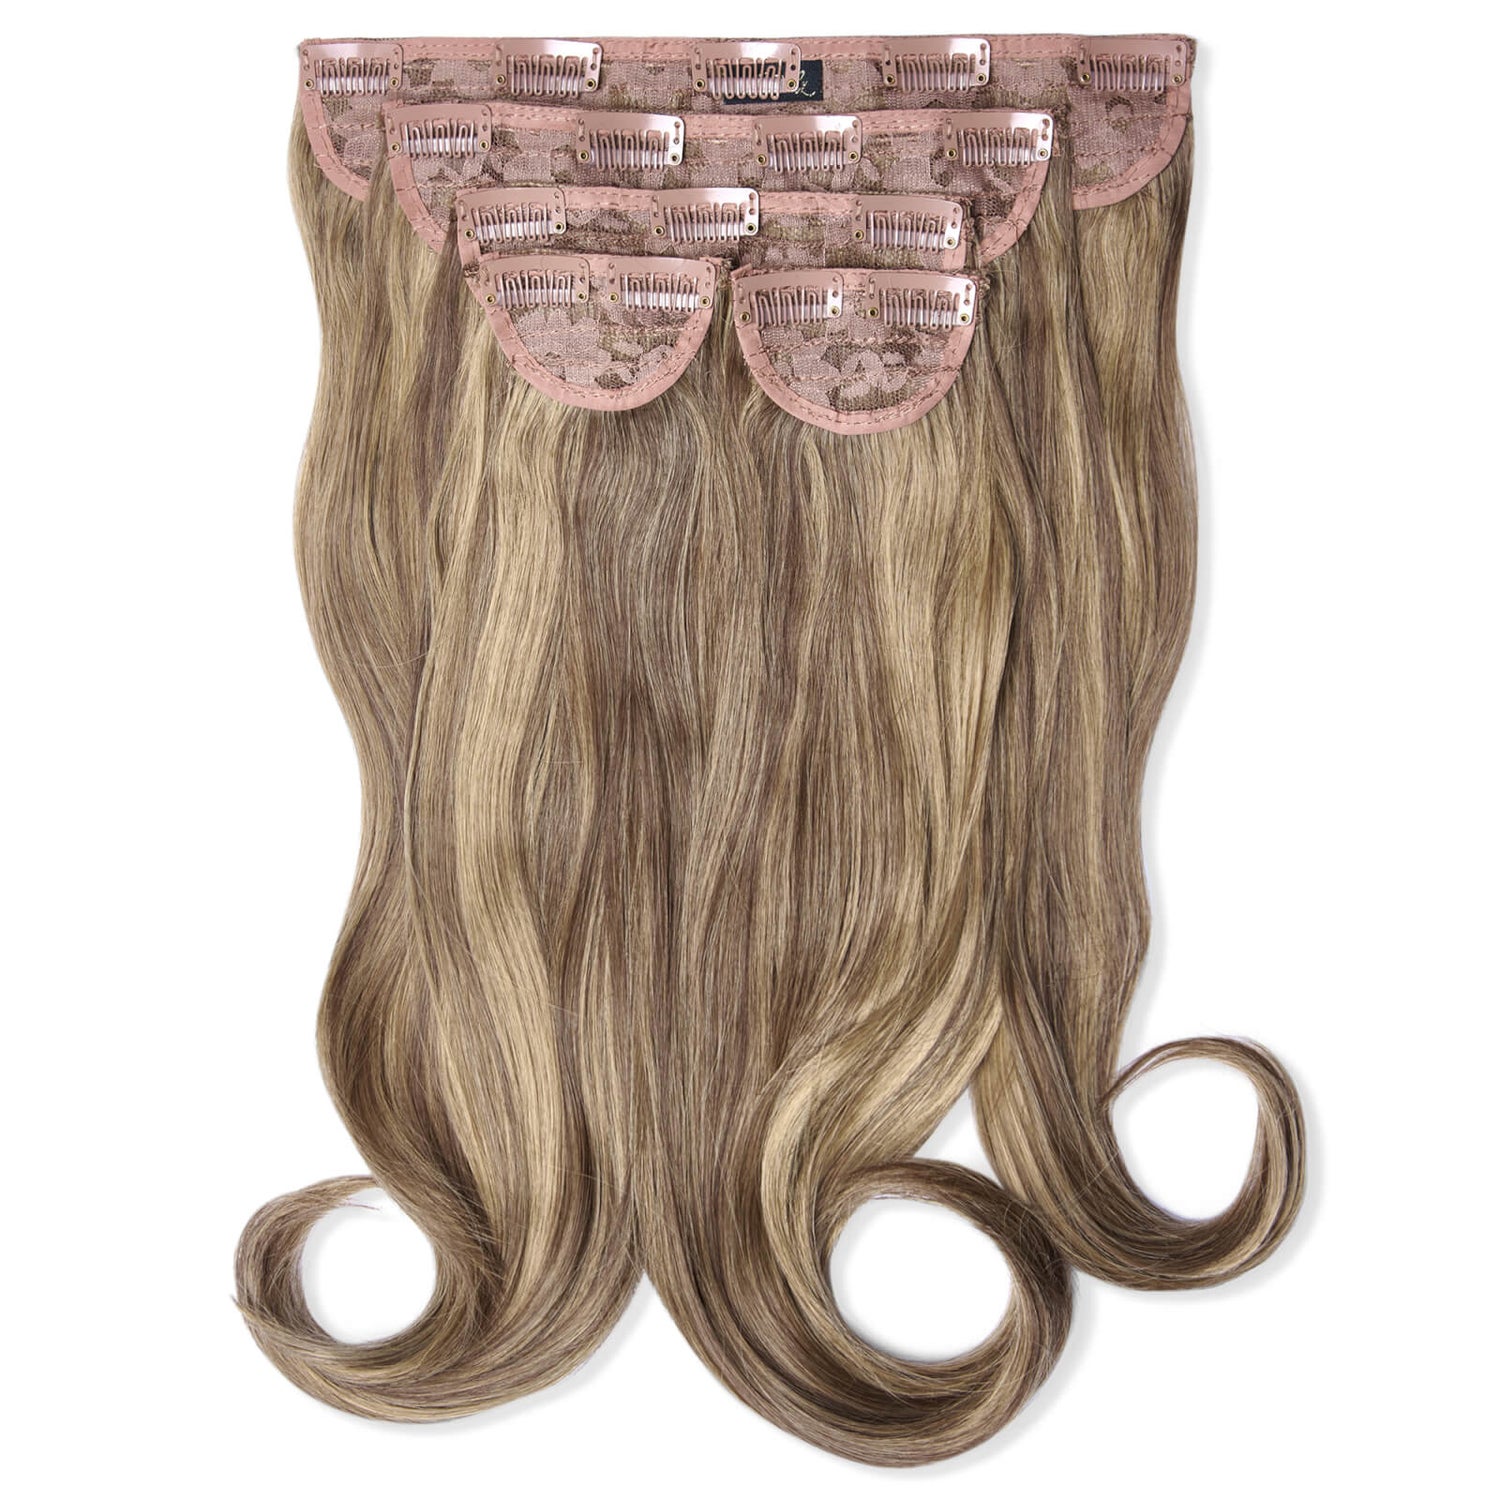 LullaBellz Super Thick 16" 5 Piece Blow Dry Wavy Clip In Extensions (Various Shades)